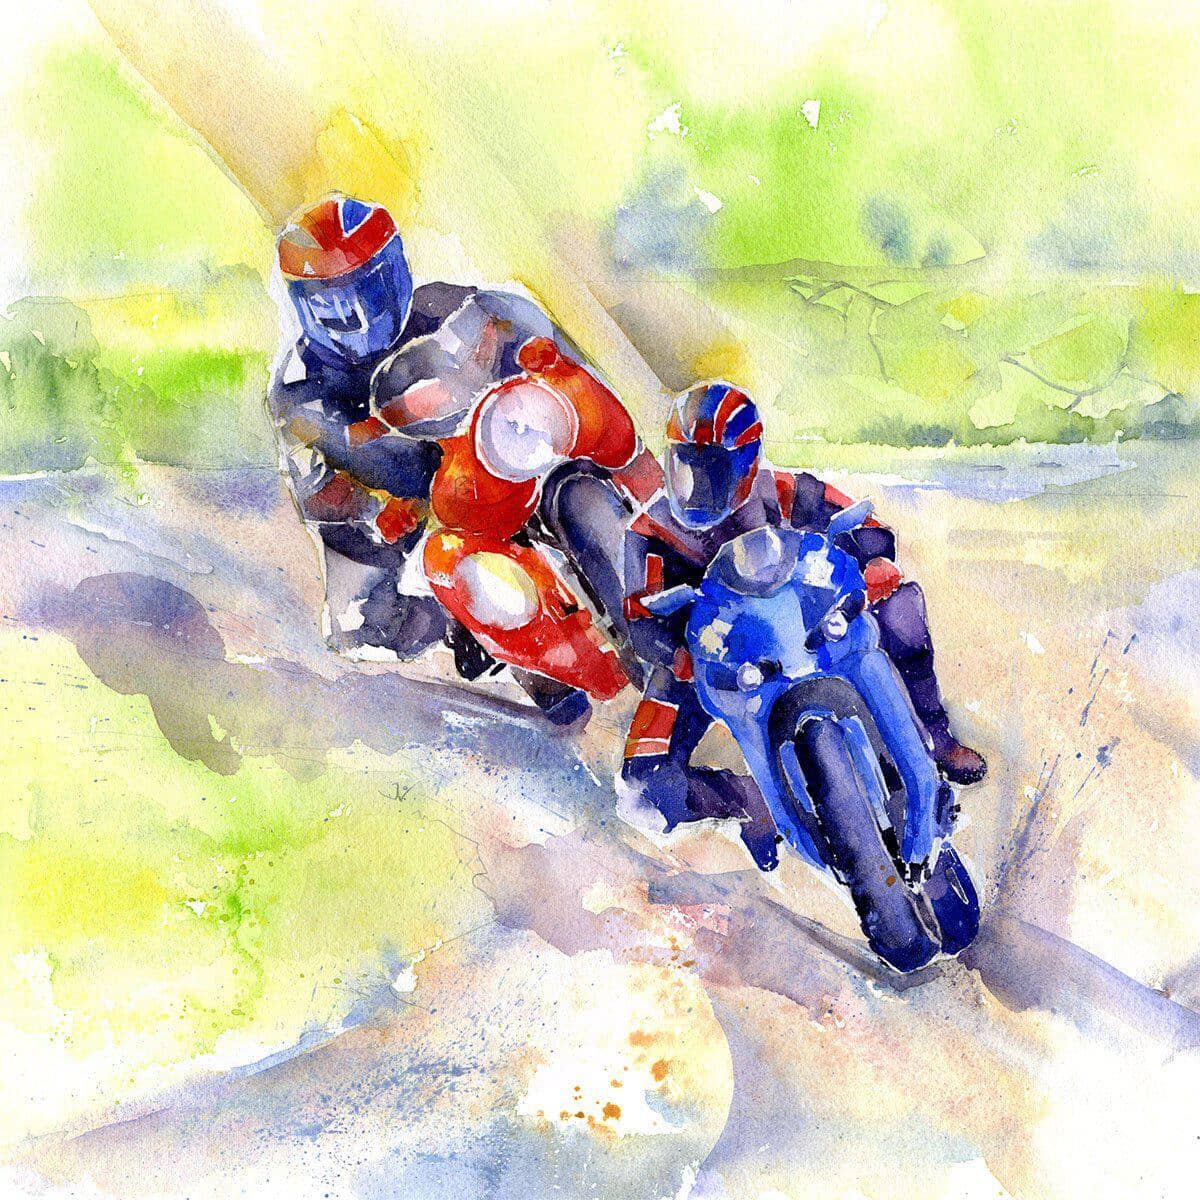 Motorbike Racing Greeting Card designed by artist Sheila Gill